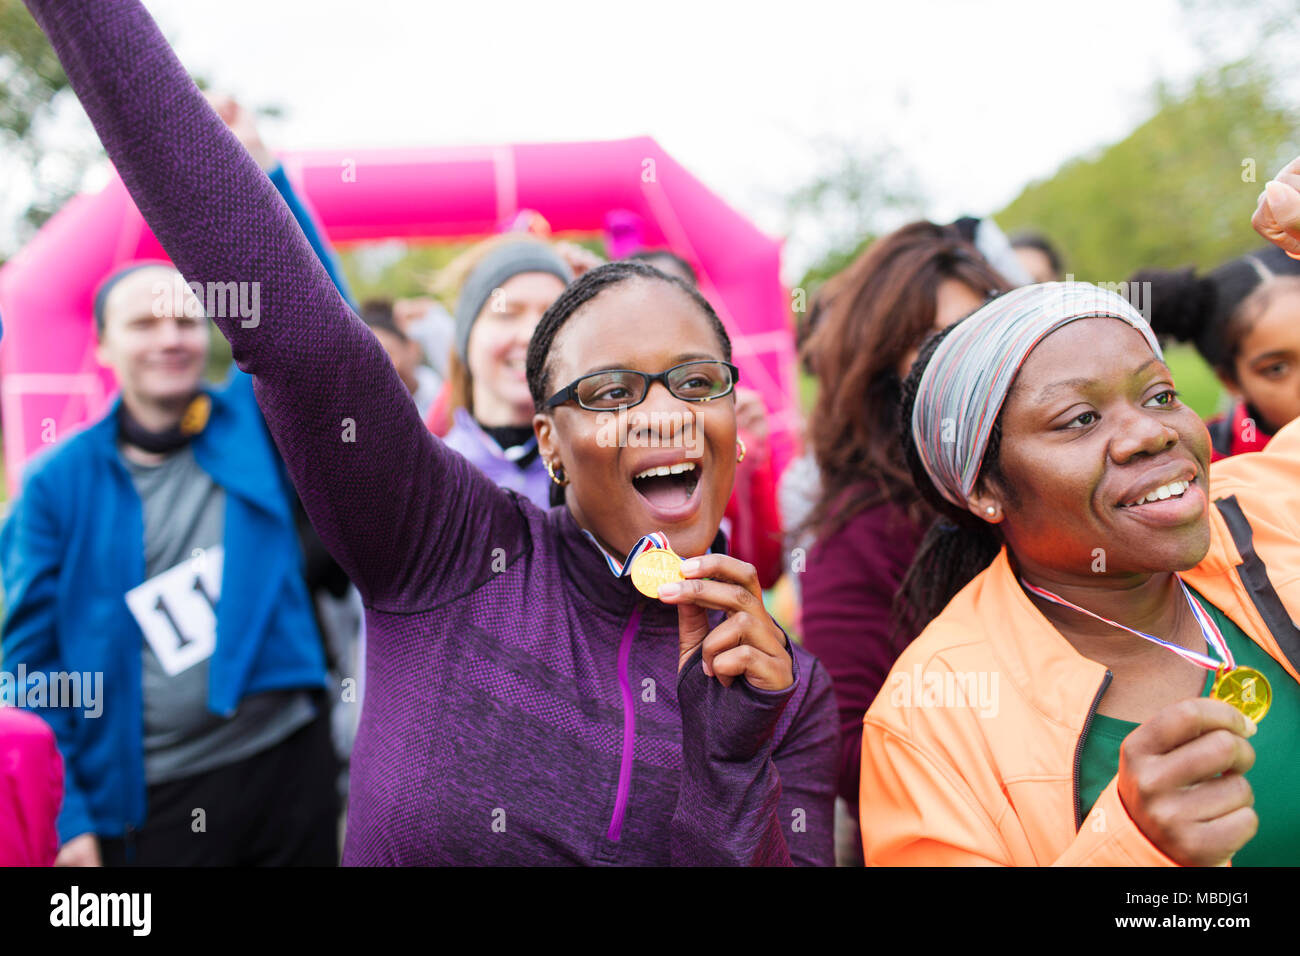 Enthusiastic female runners with medals cheering, celebrating at charity run Stock Photo